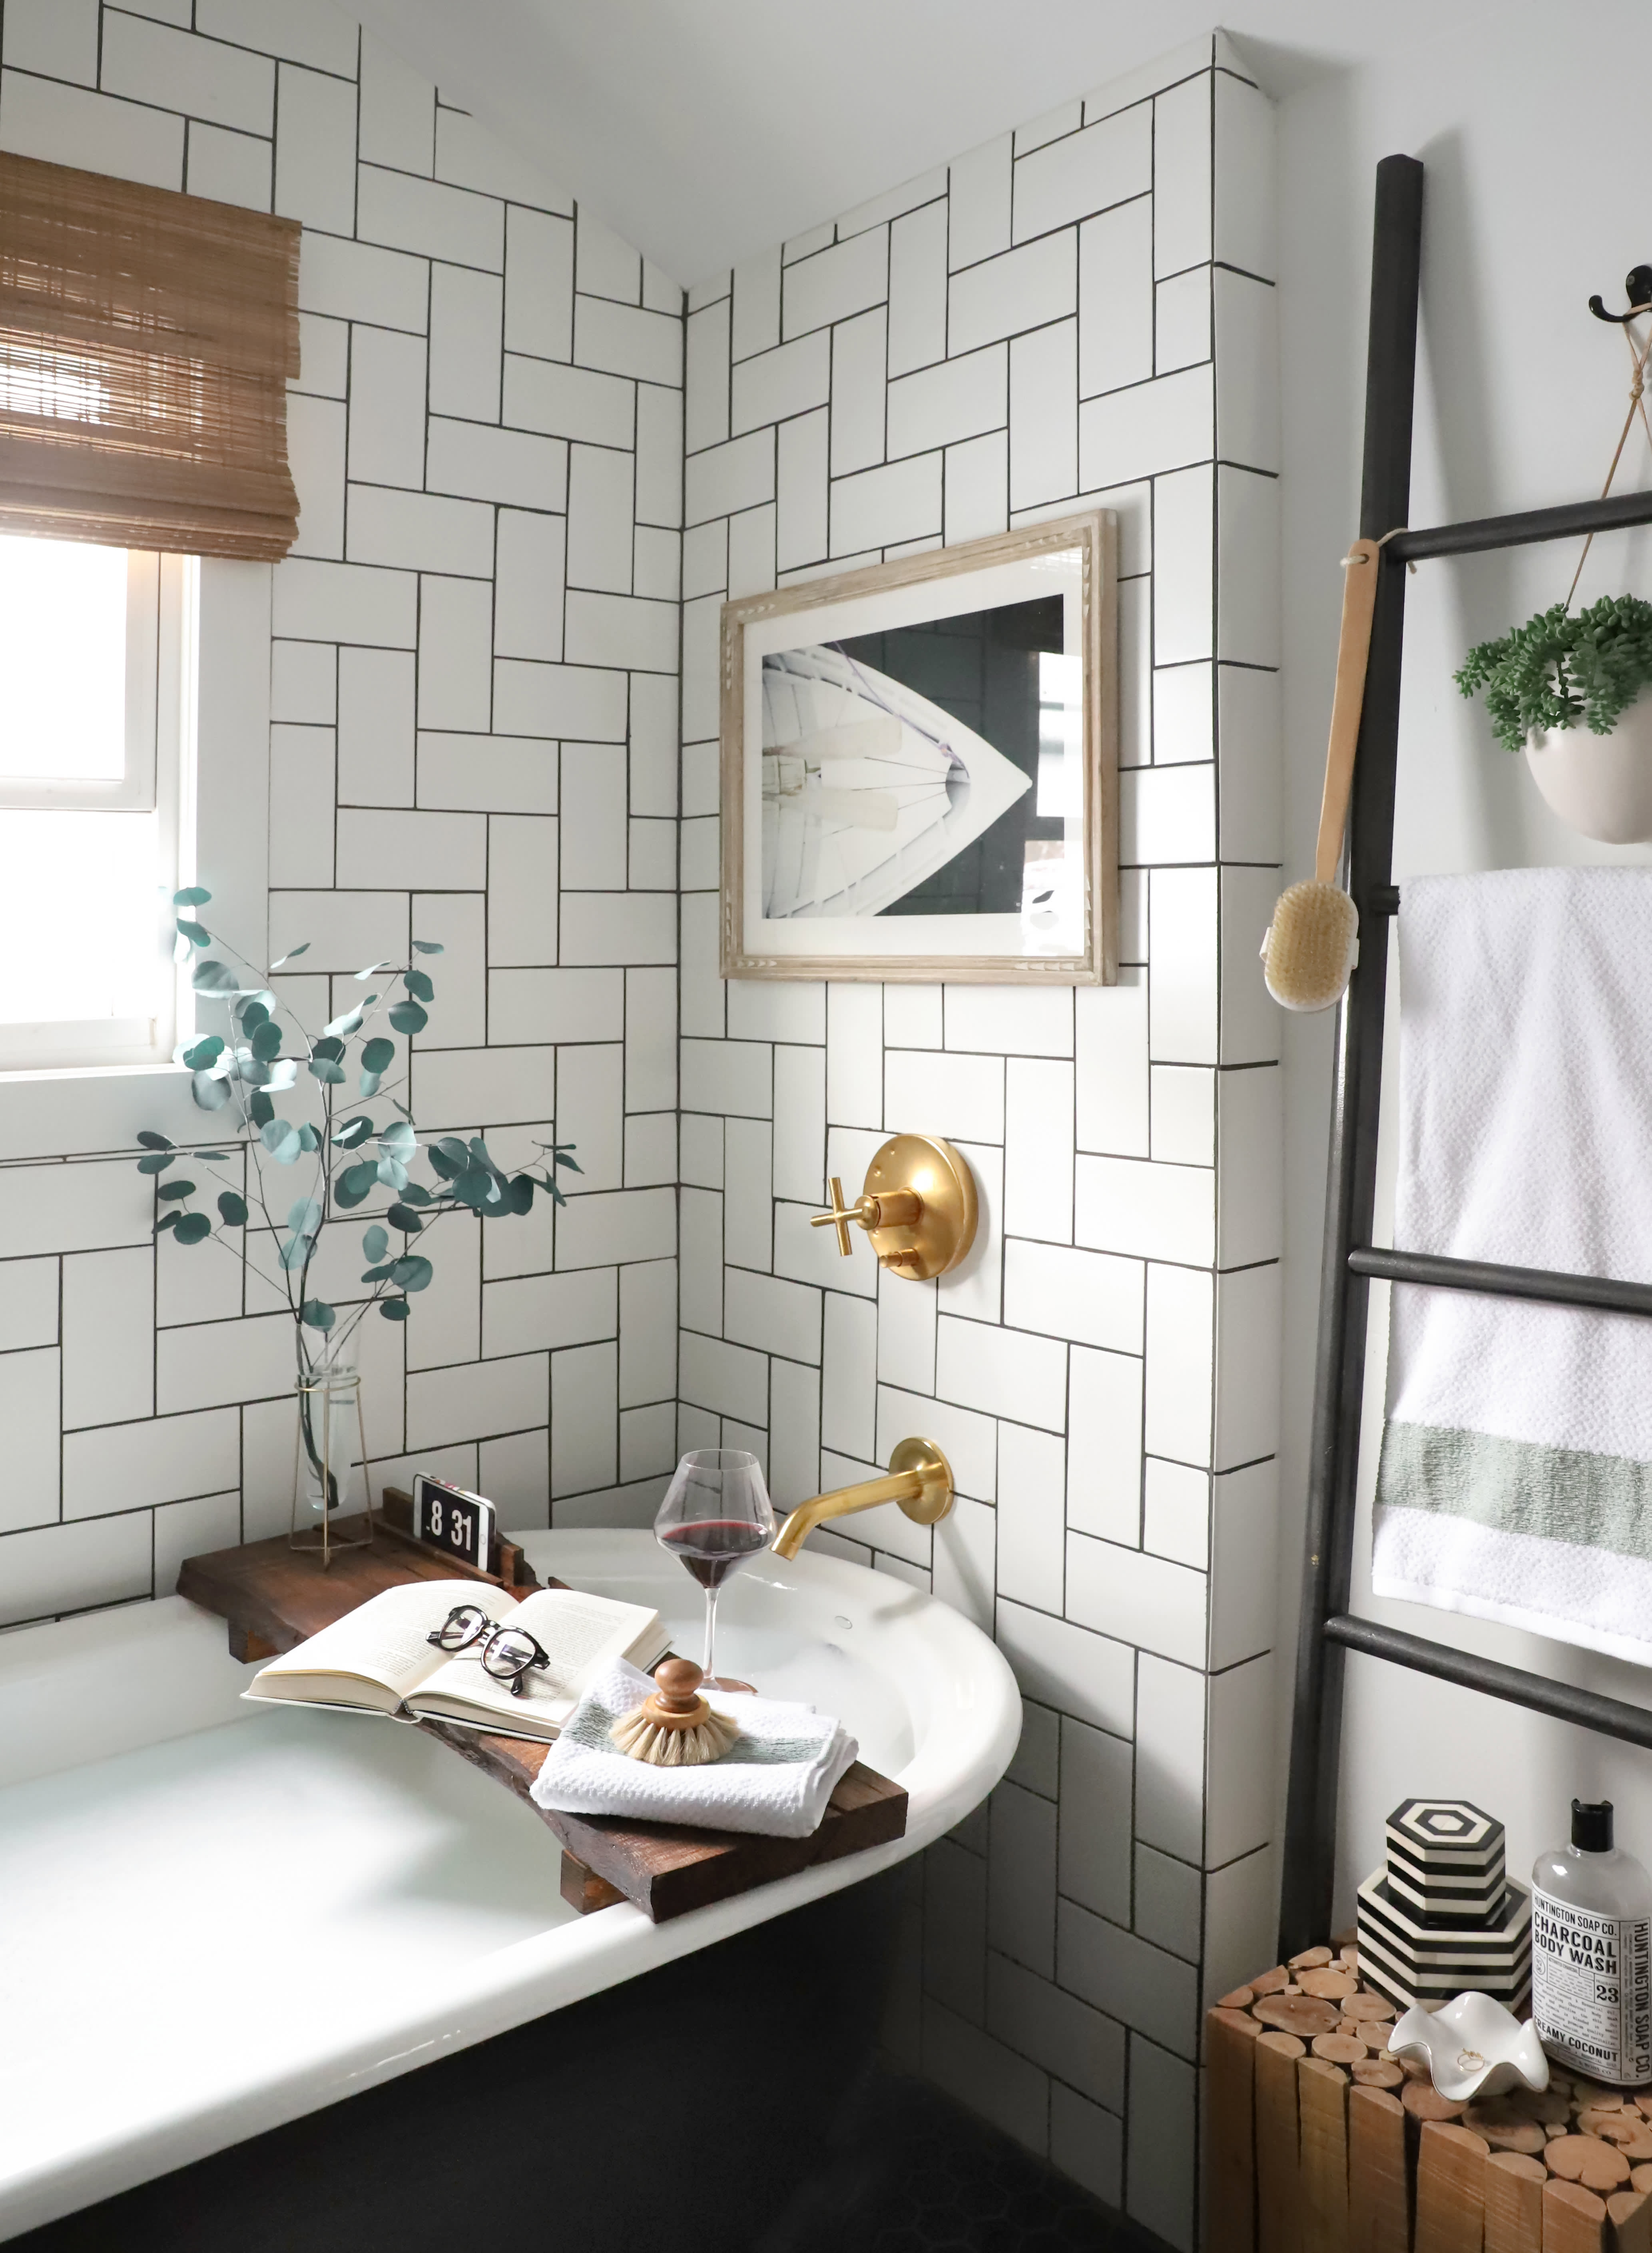 46+ Ideas For Bathroom Tiles On Walls Images